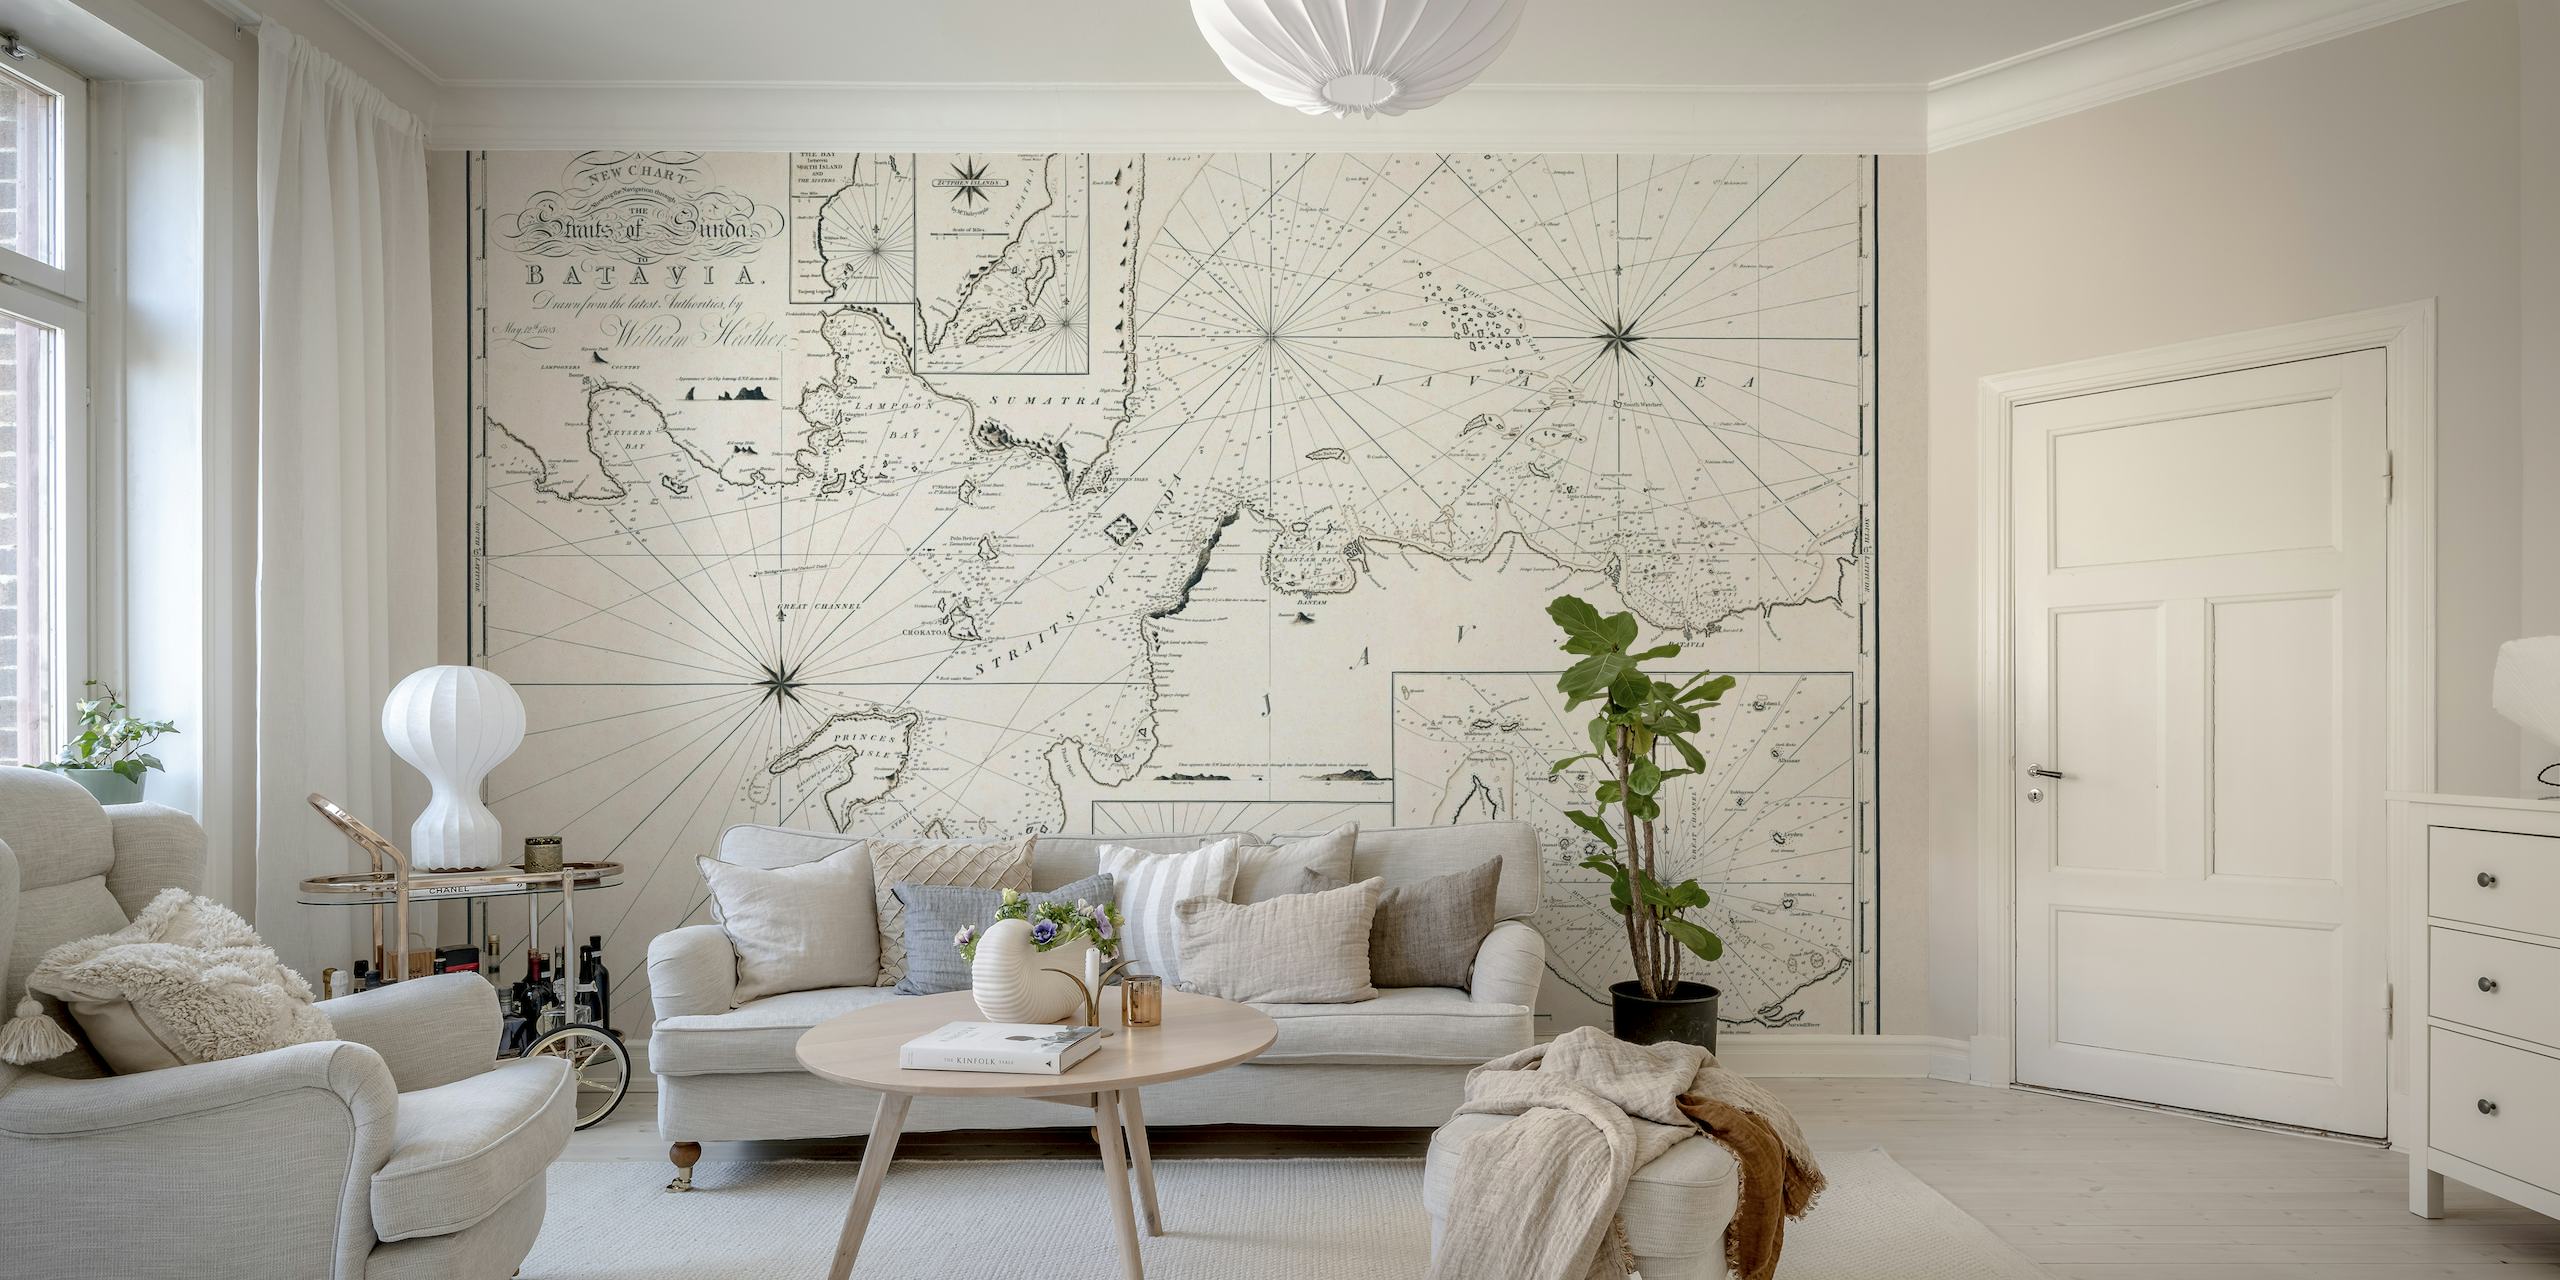 Vintage-style map wall mural of Indonesia with sepia tones and historical cartography details.